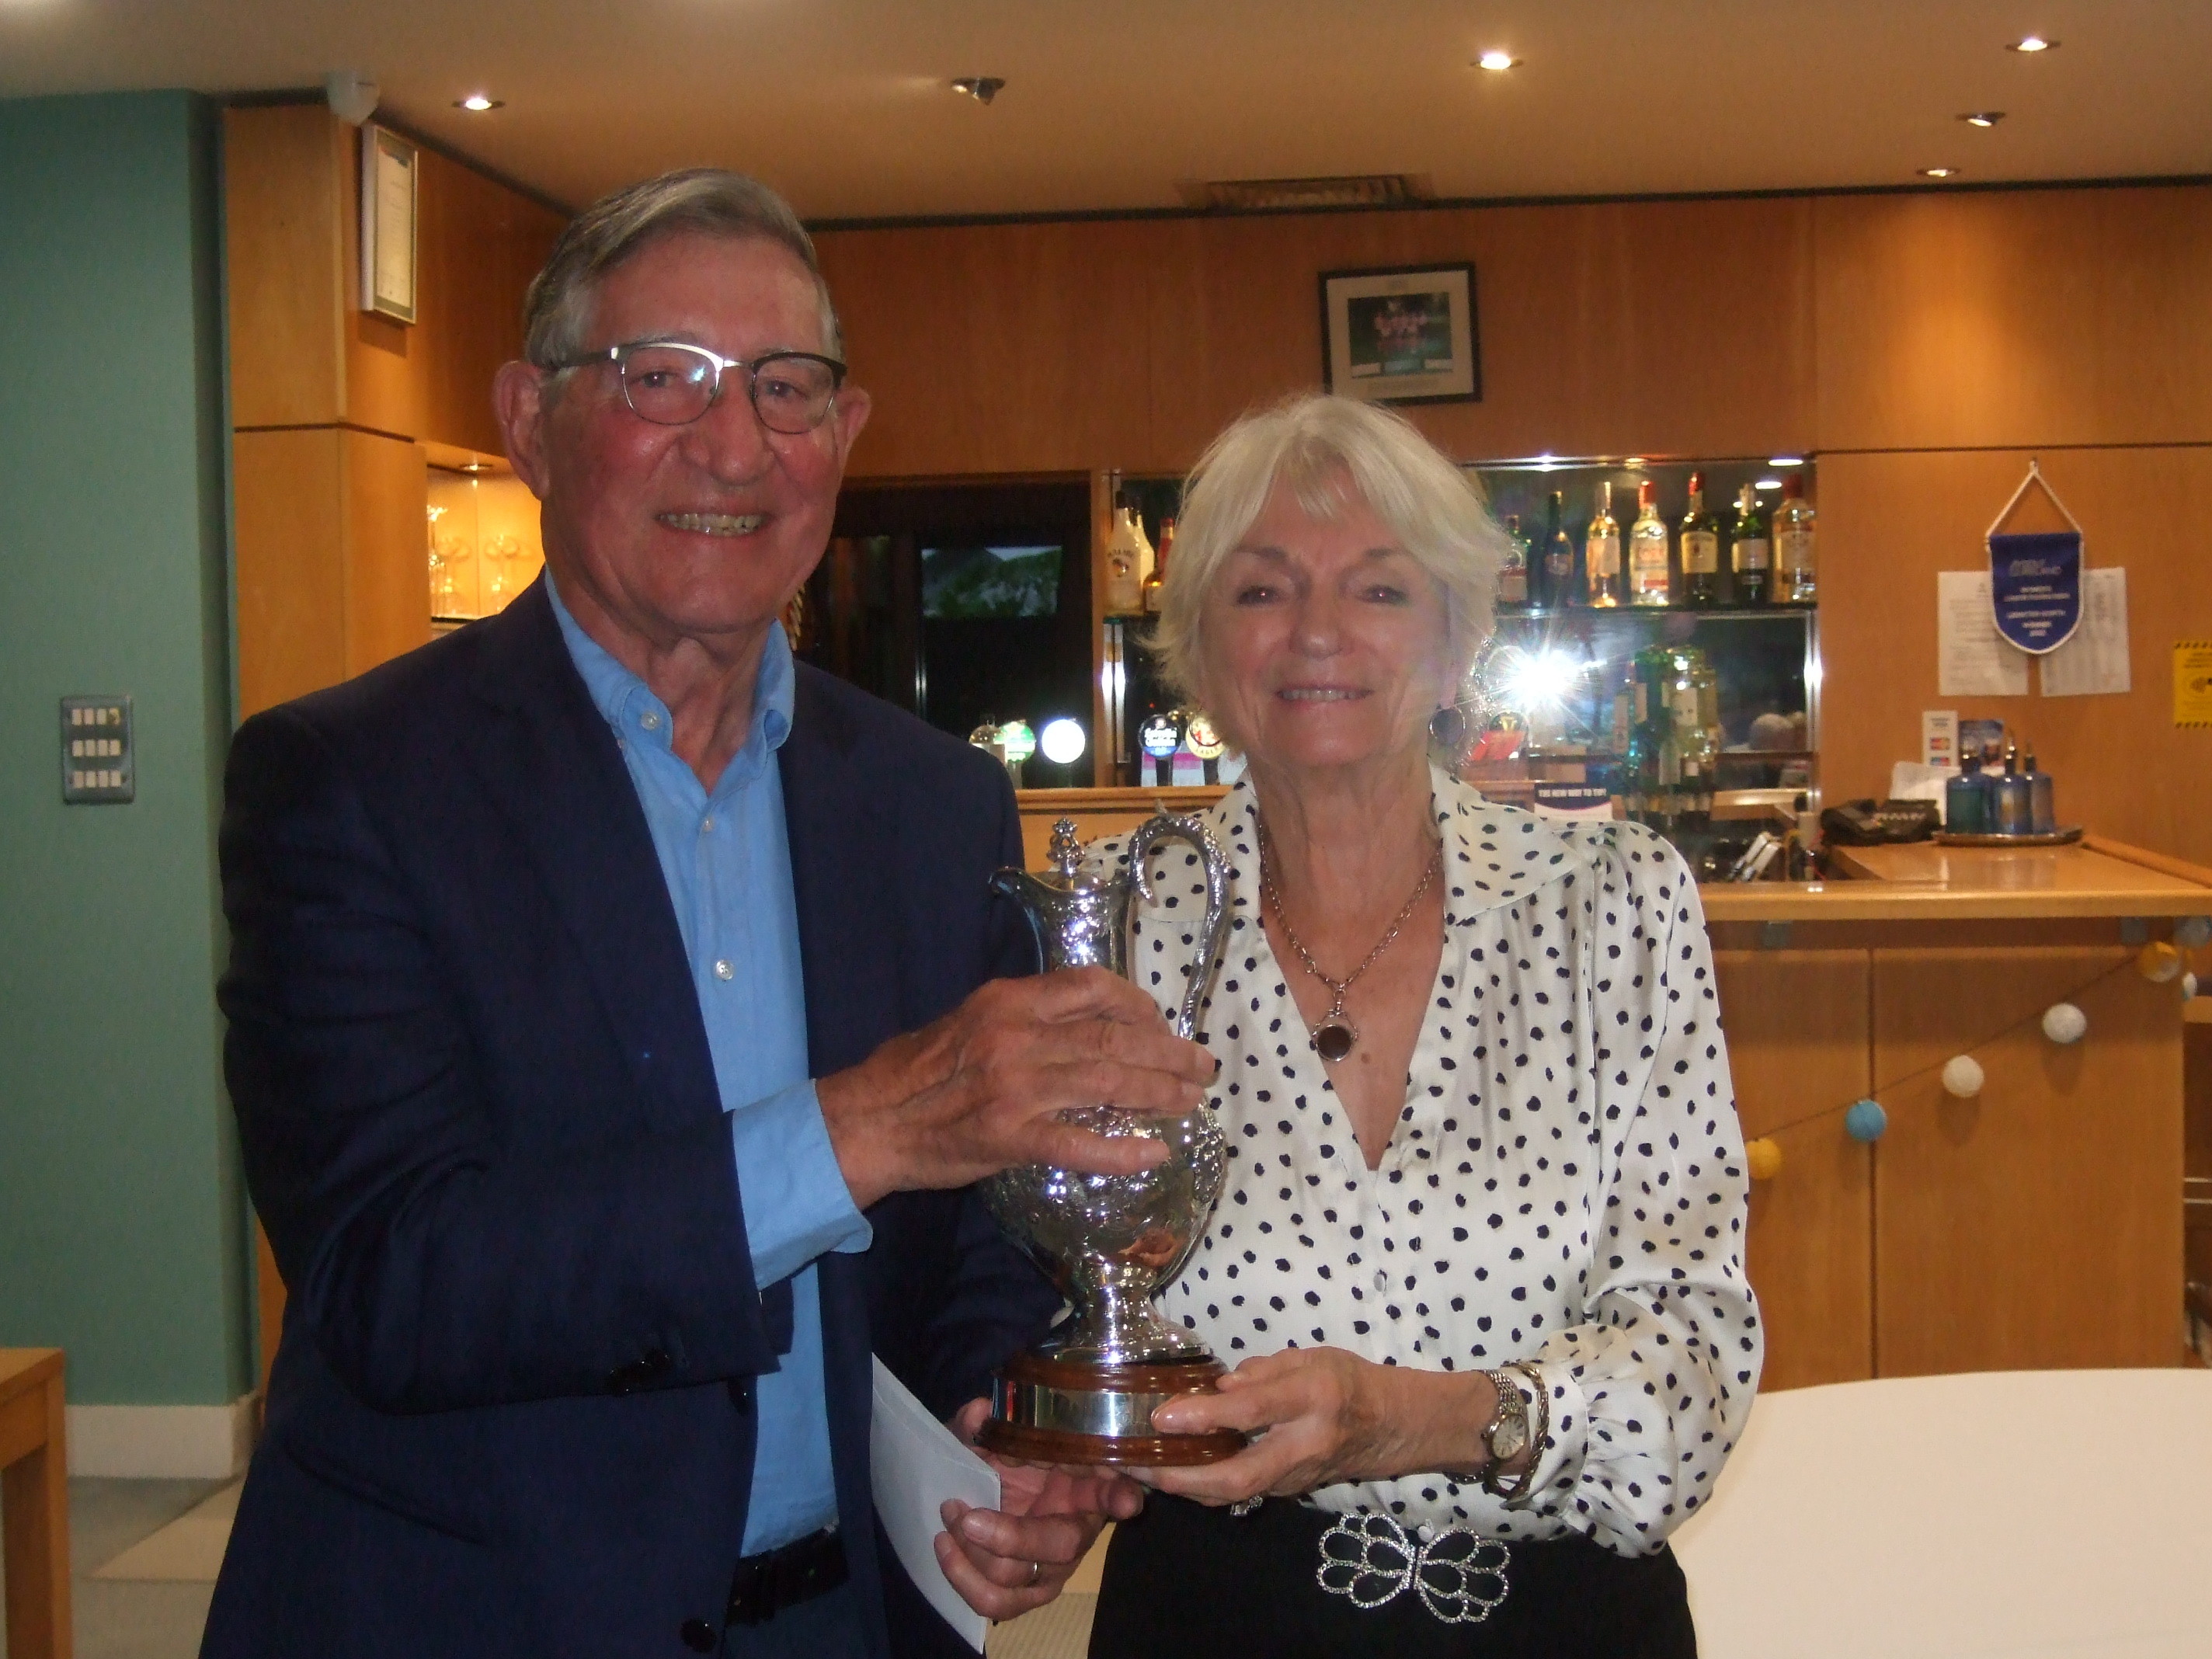 President Eileen Lappin presenting the Claret Jug to Damian Jennings